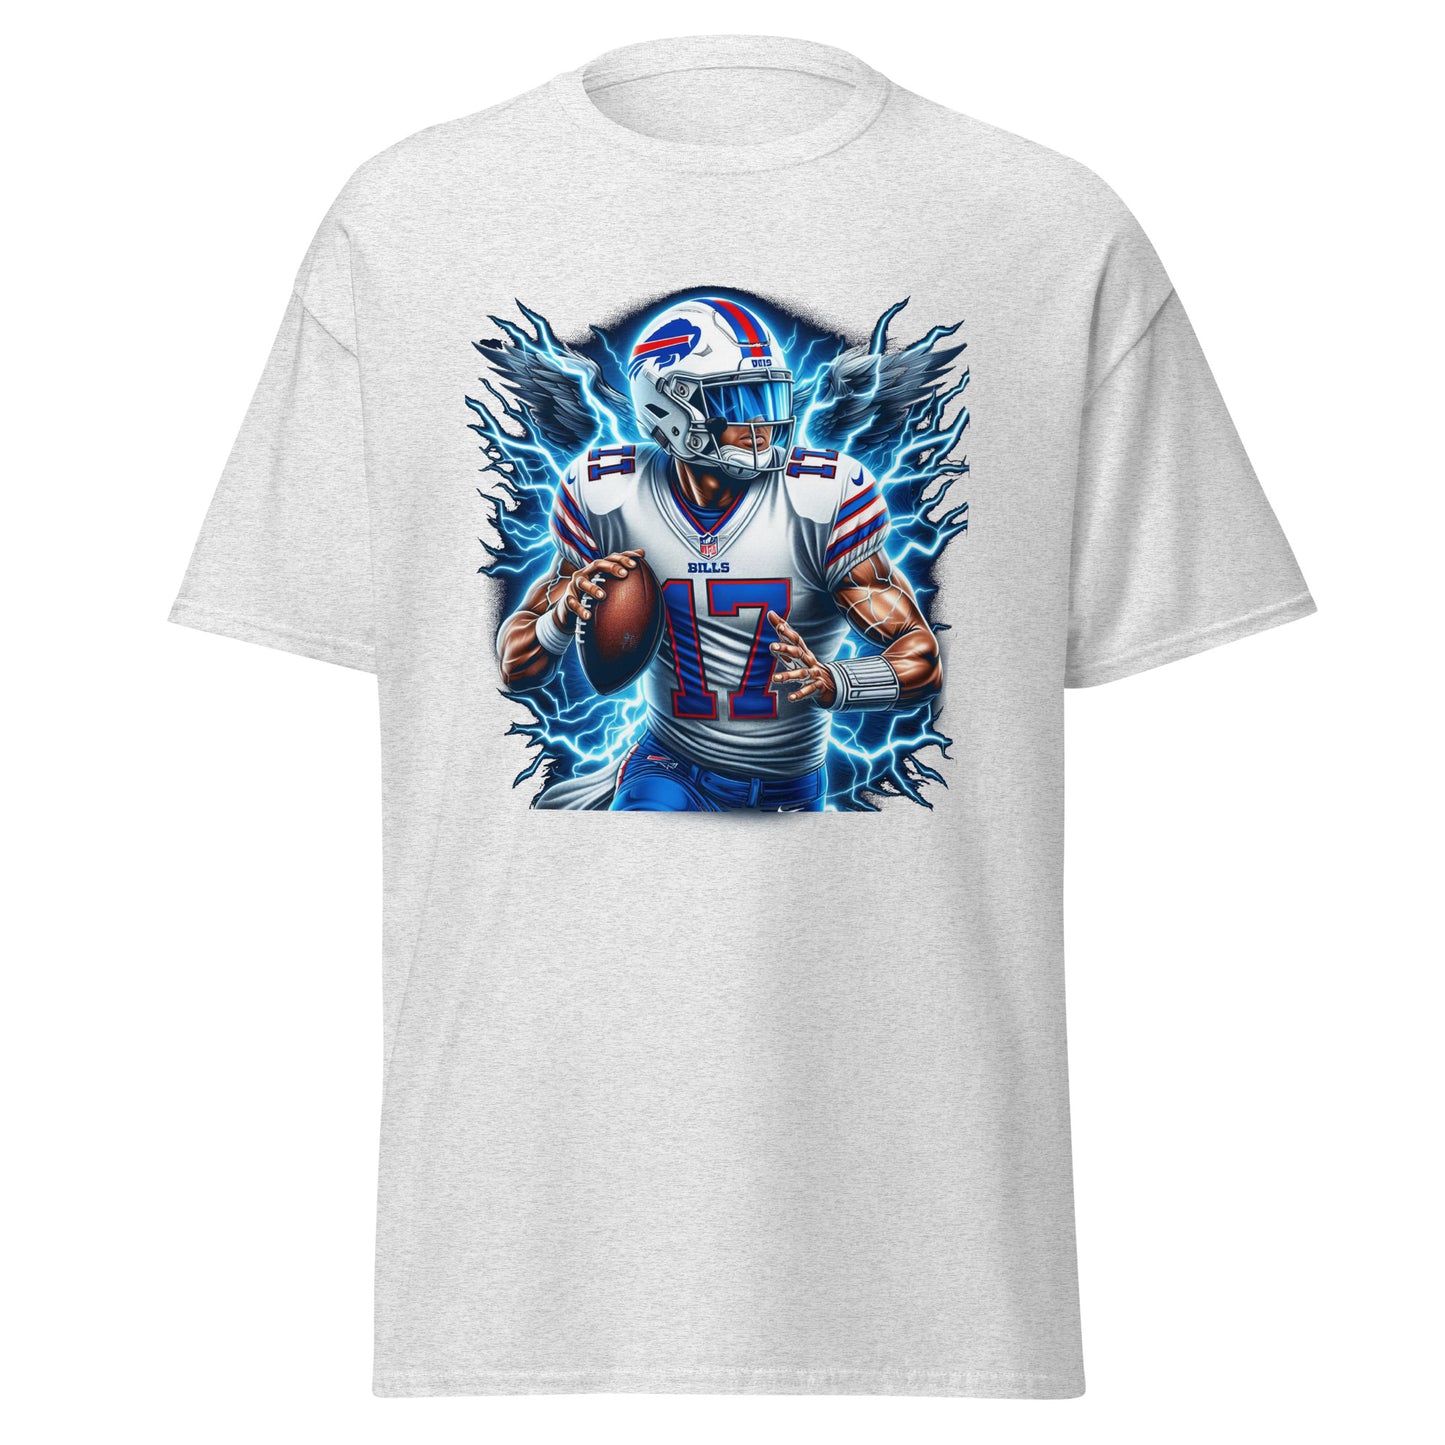 Josh Allen Elite Performance T-Shirt - Embrace the Swagger of #17